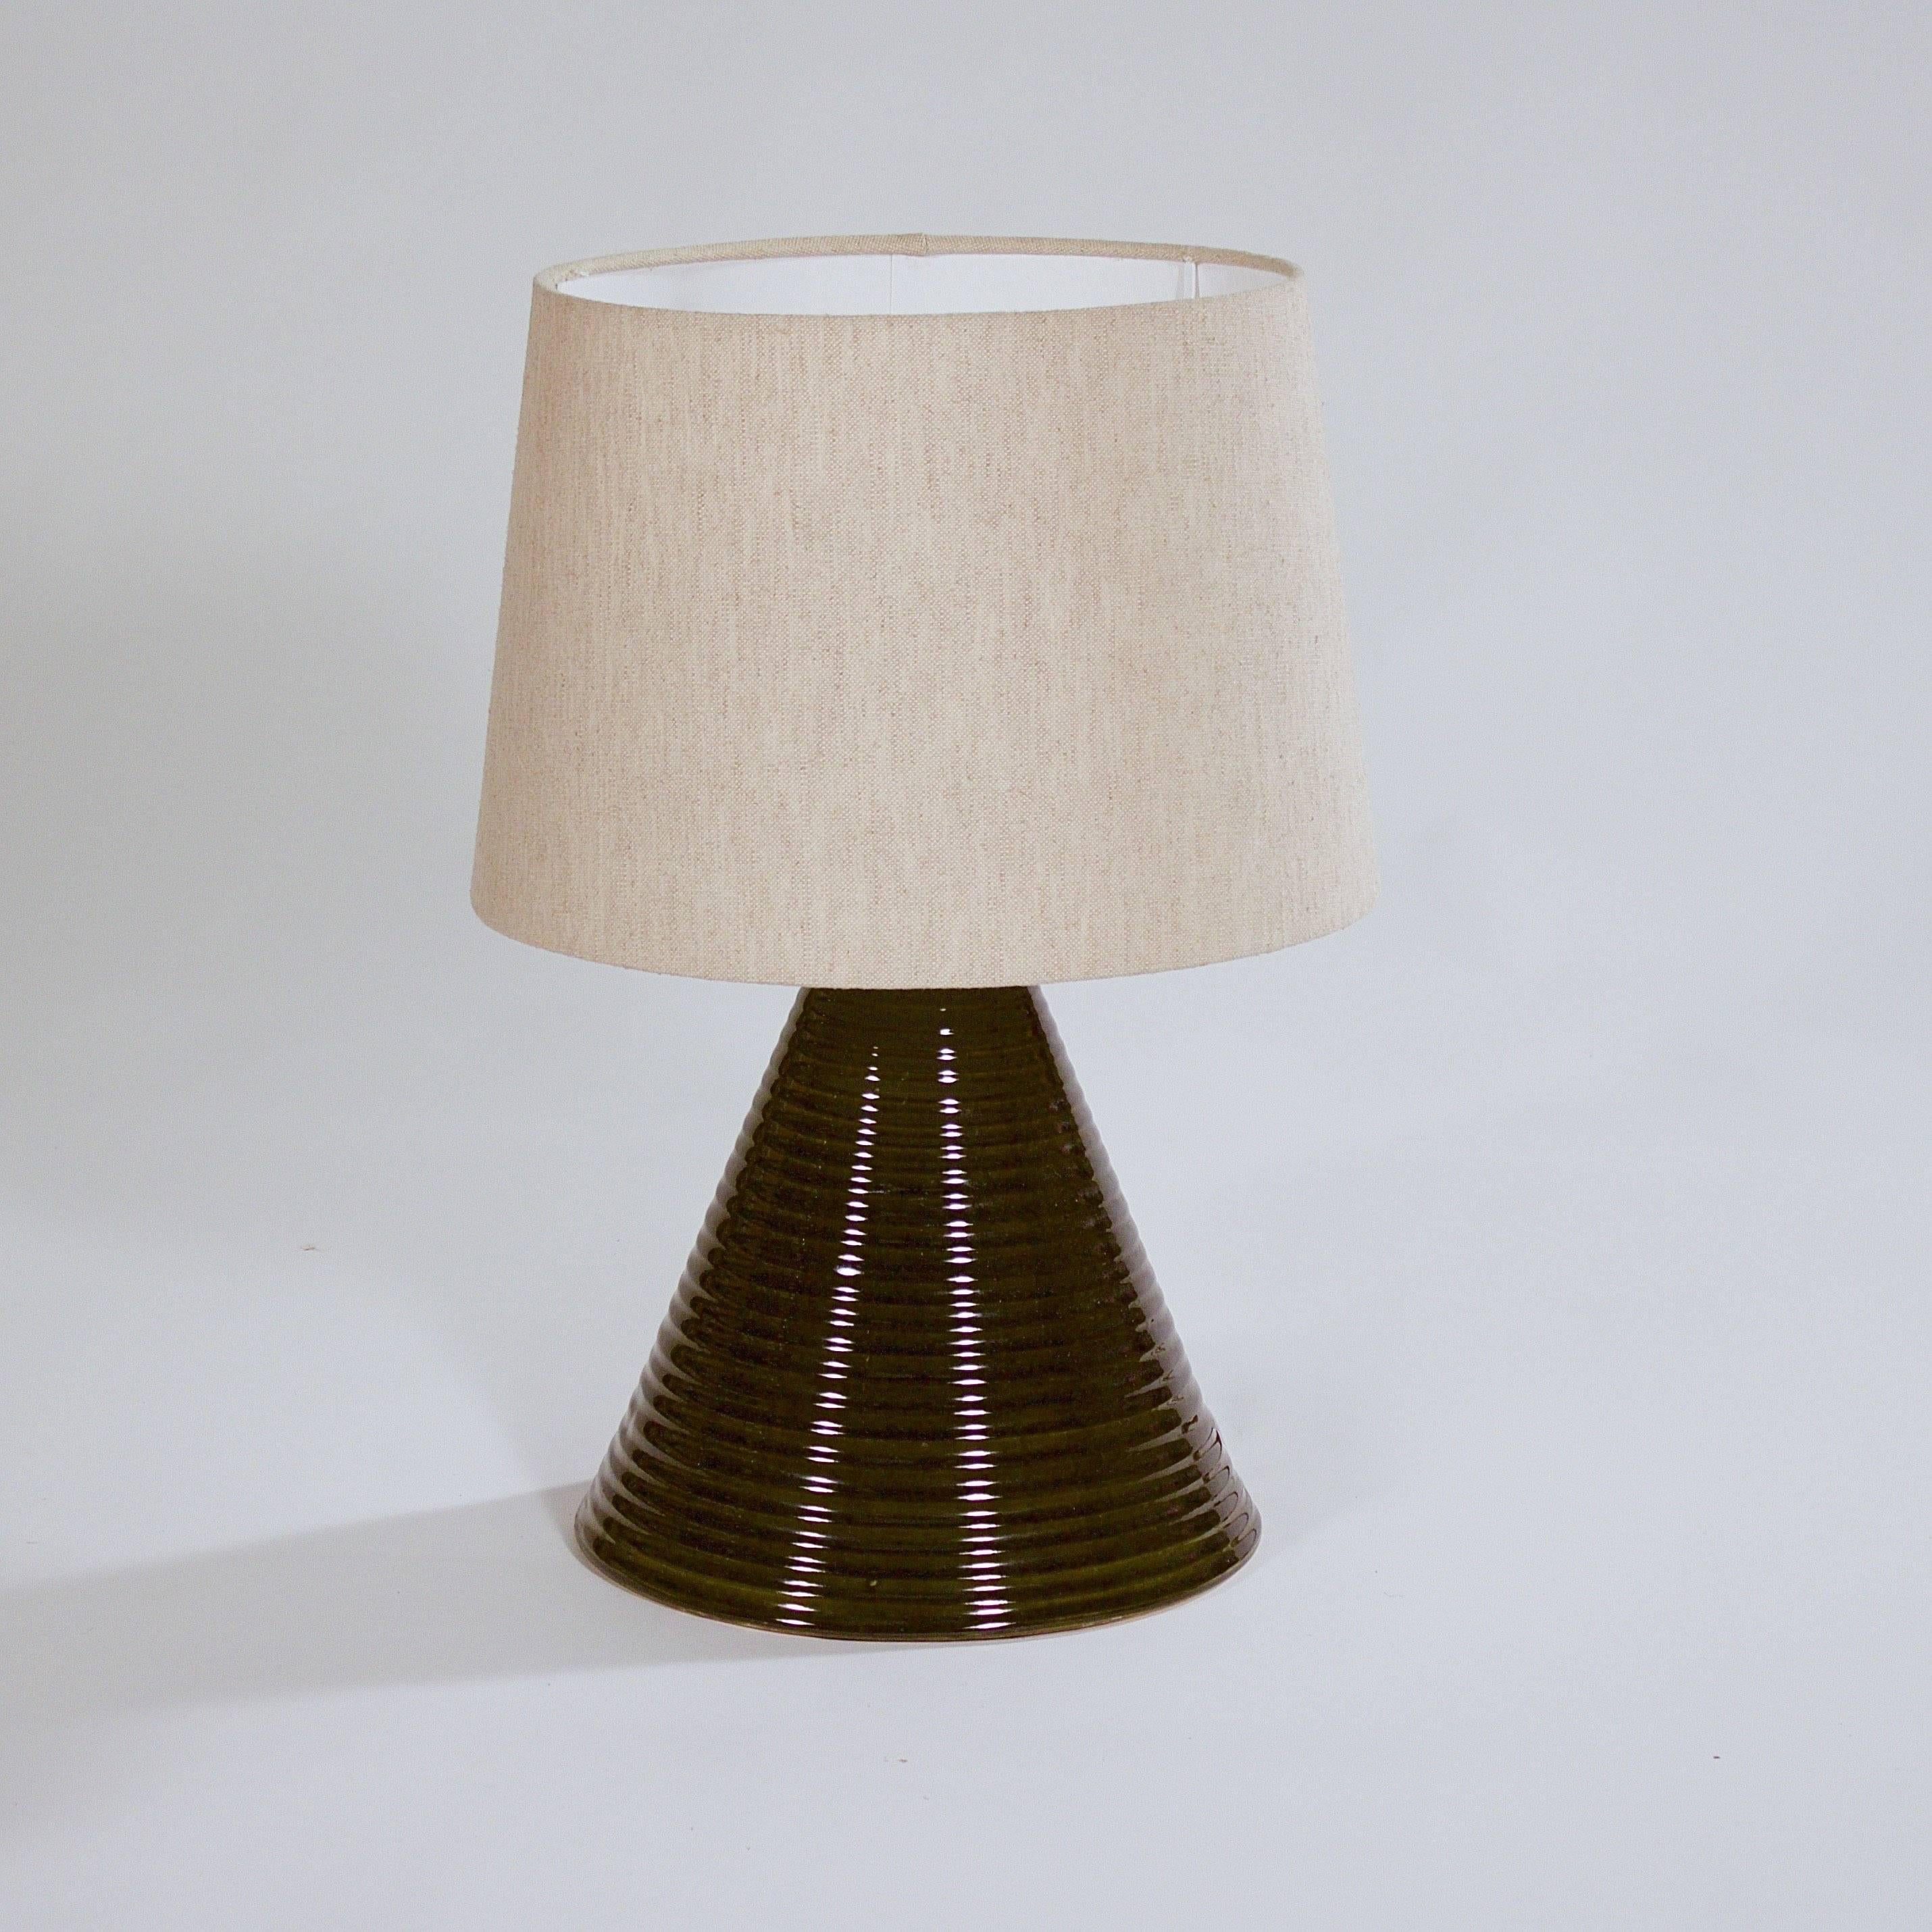 A stoneware cone shaped table lamp with a ribbed body and deep green glaze.

Designed for Rorstrand. Sweden, circa 1960s

Dimensions do not include the shade. Shade not included in the sale.